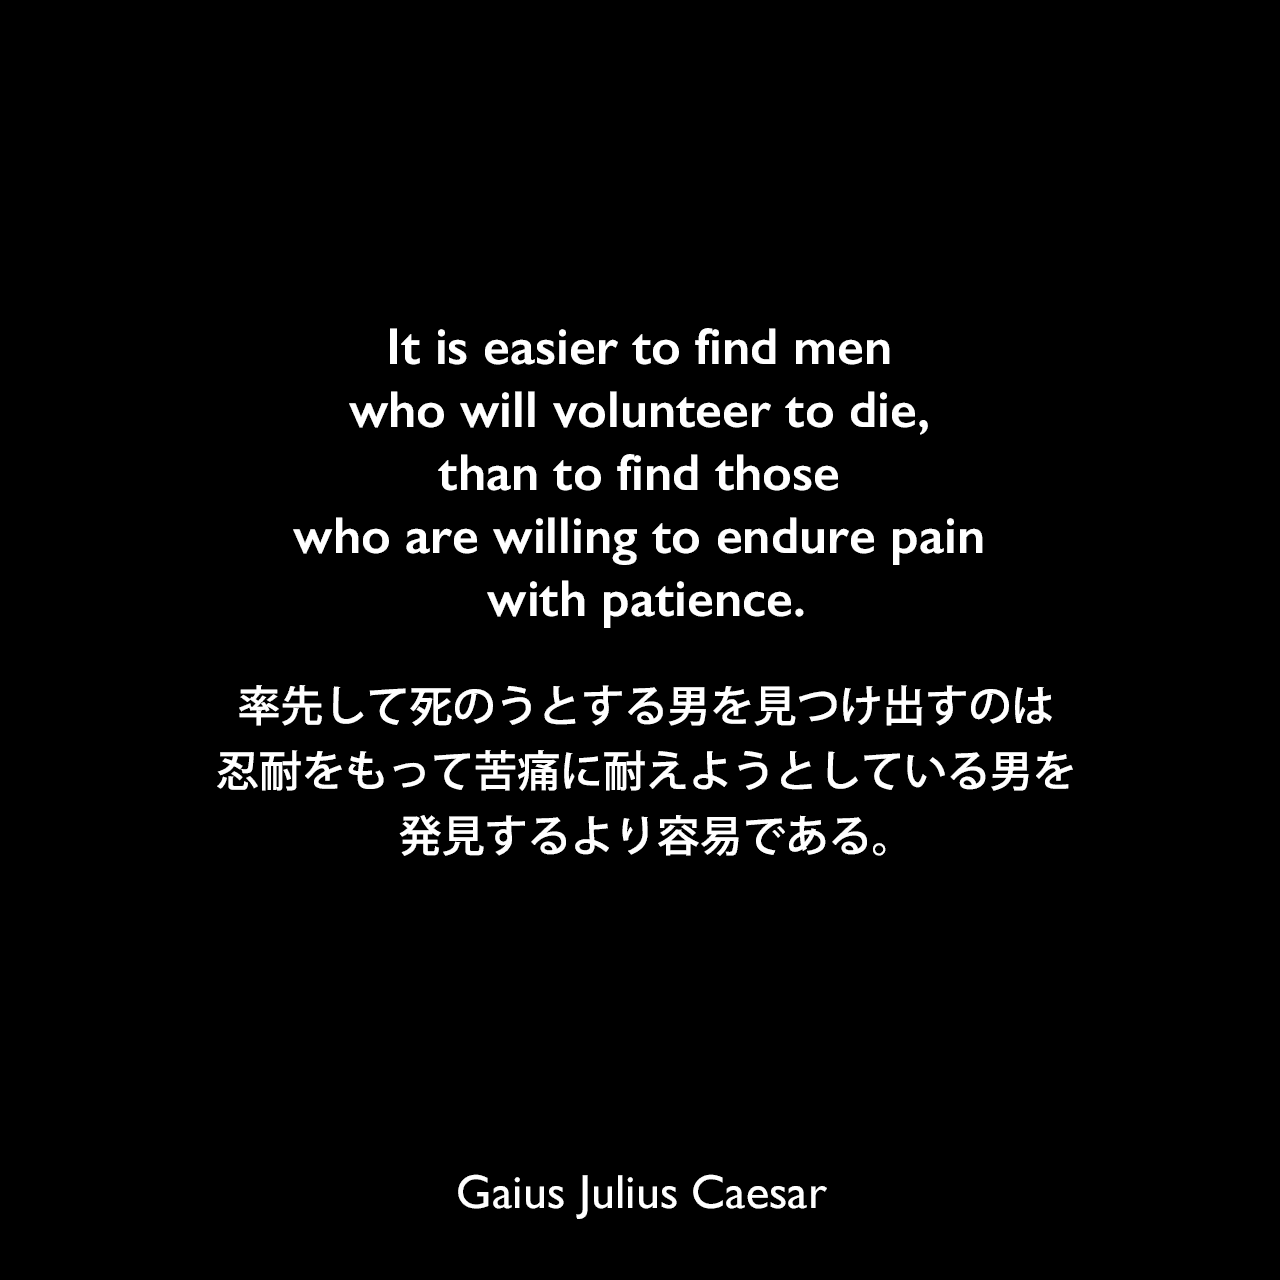 It is easier to find men who will volunteer to die, than to find those who are willing to endure pain with patience.率先して死のうとする男を見つけ出すのは、忍耐をもって苦痛に耐えようとしている男を発見するより容易である。Gaius Julius Caesar